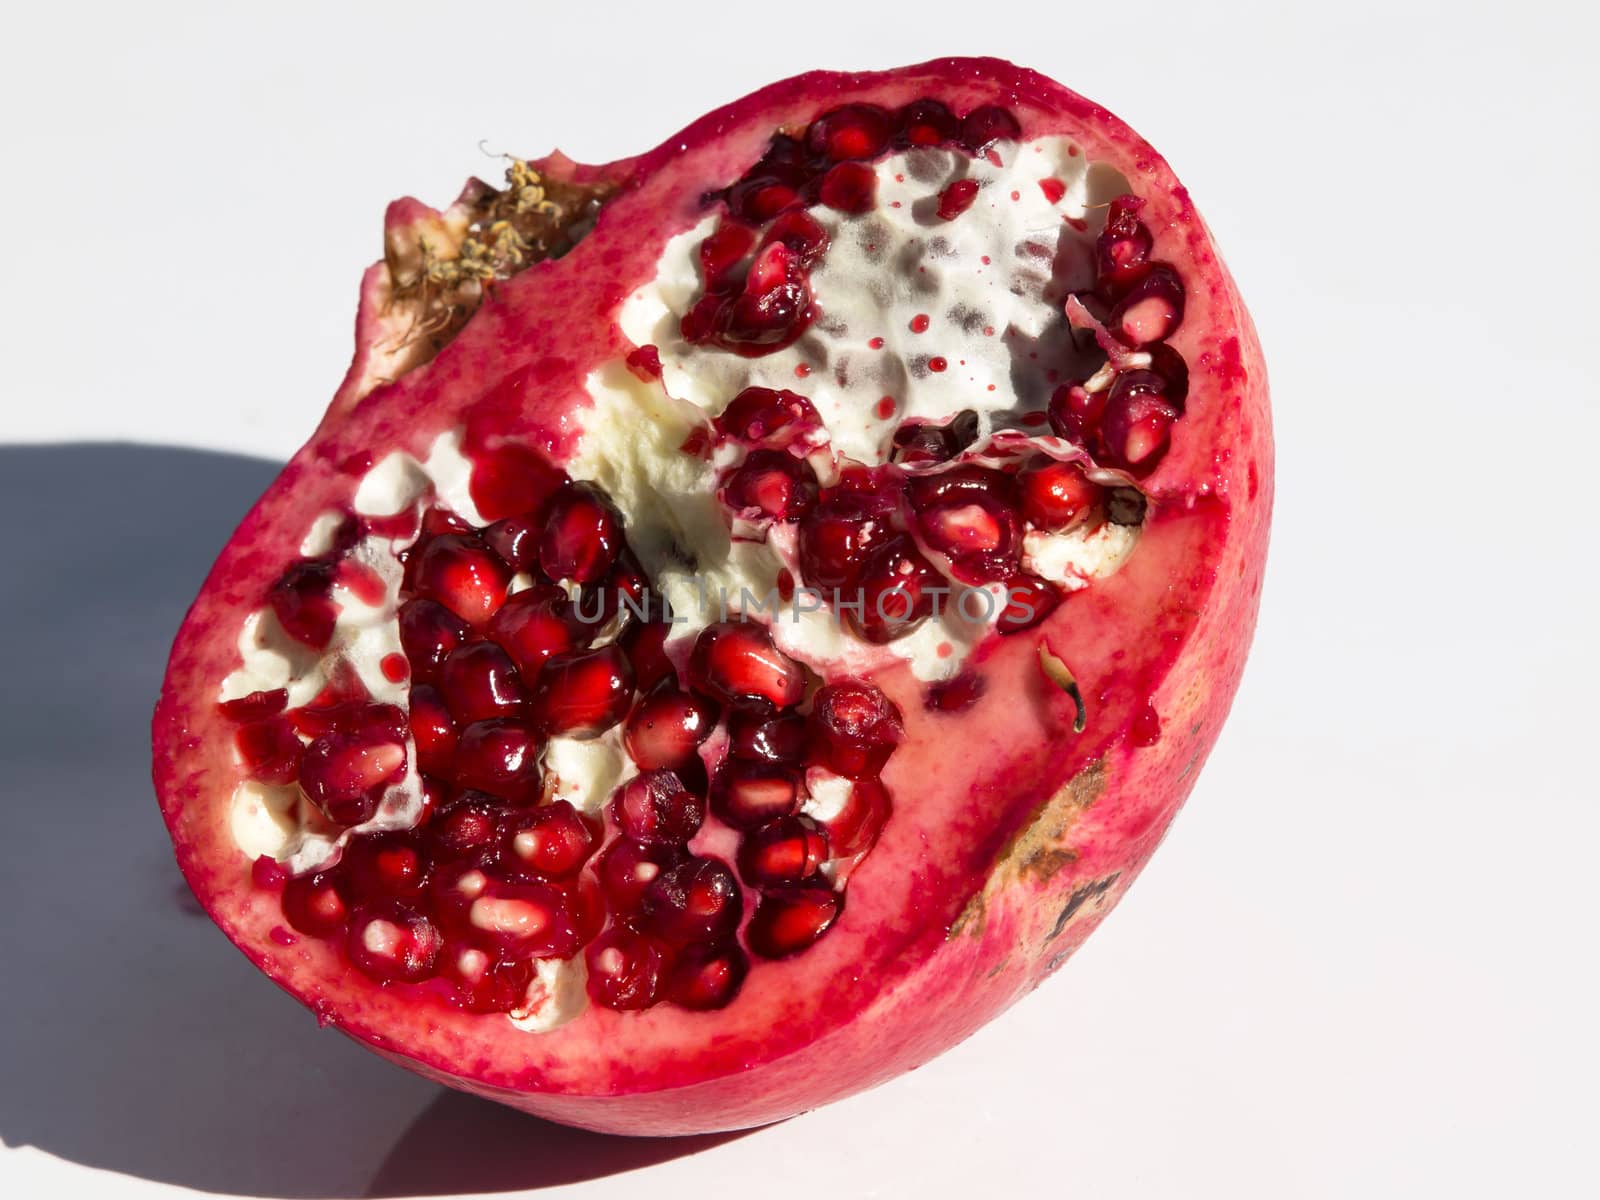 pomegranate by nevenm